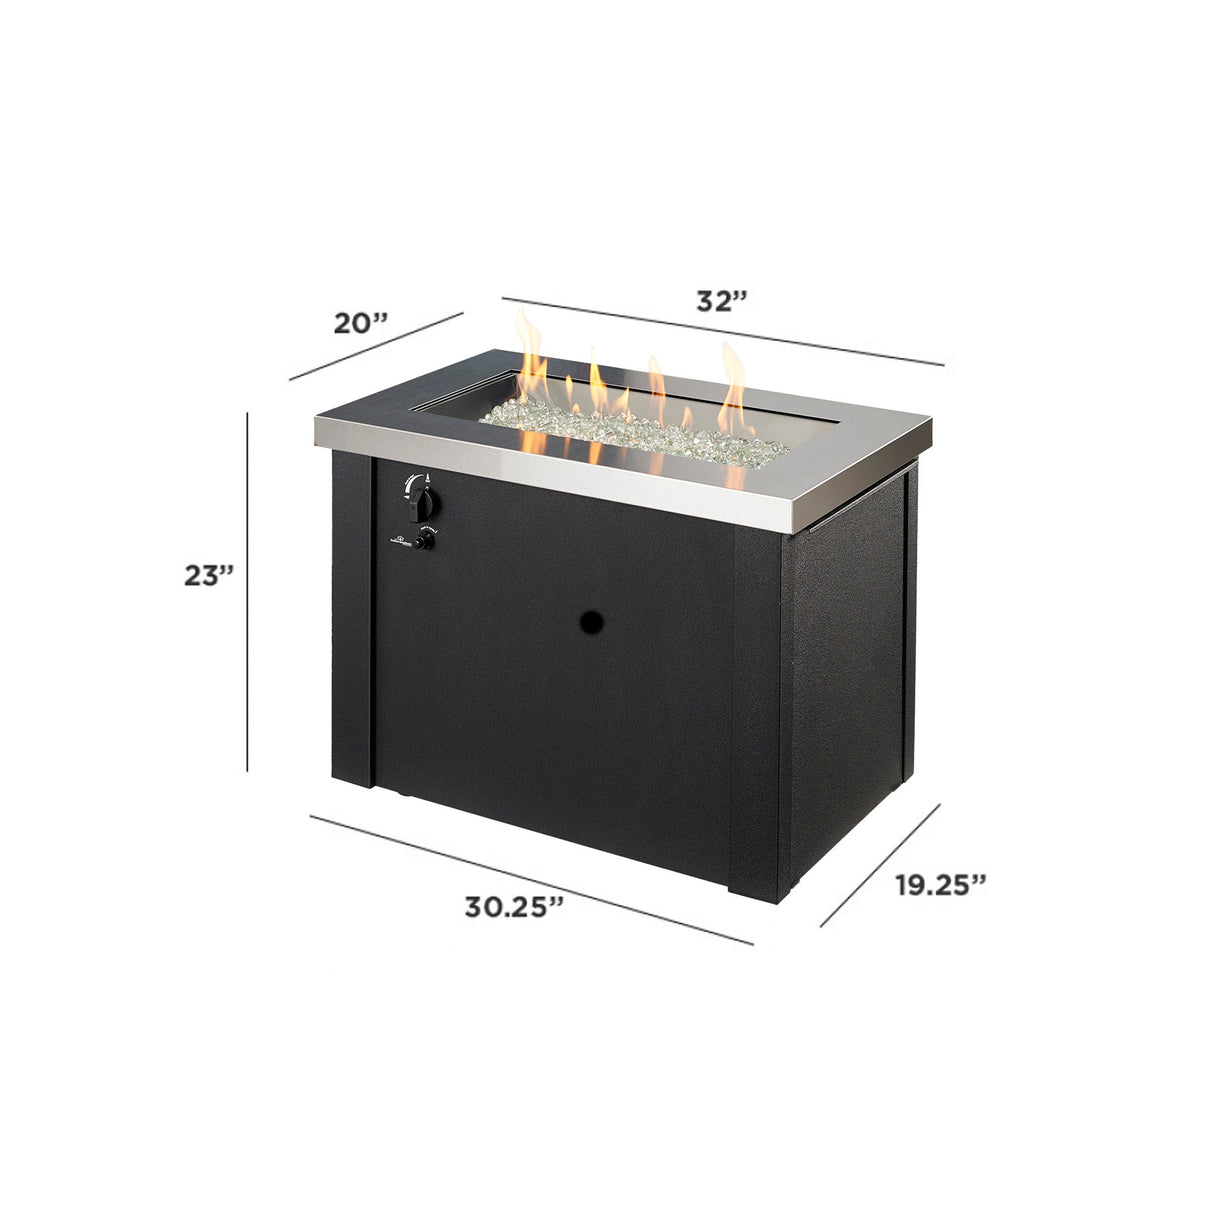 Dimensions overlaid on the Providence Rectangular Gas Fire Pit Table